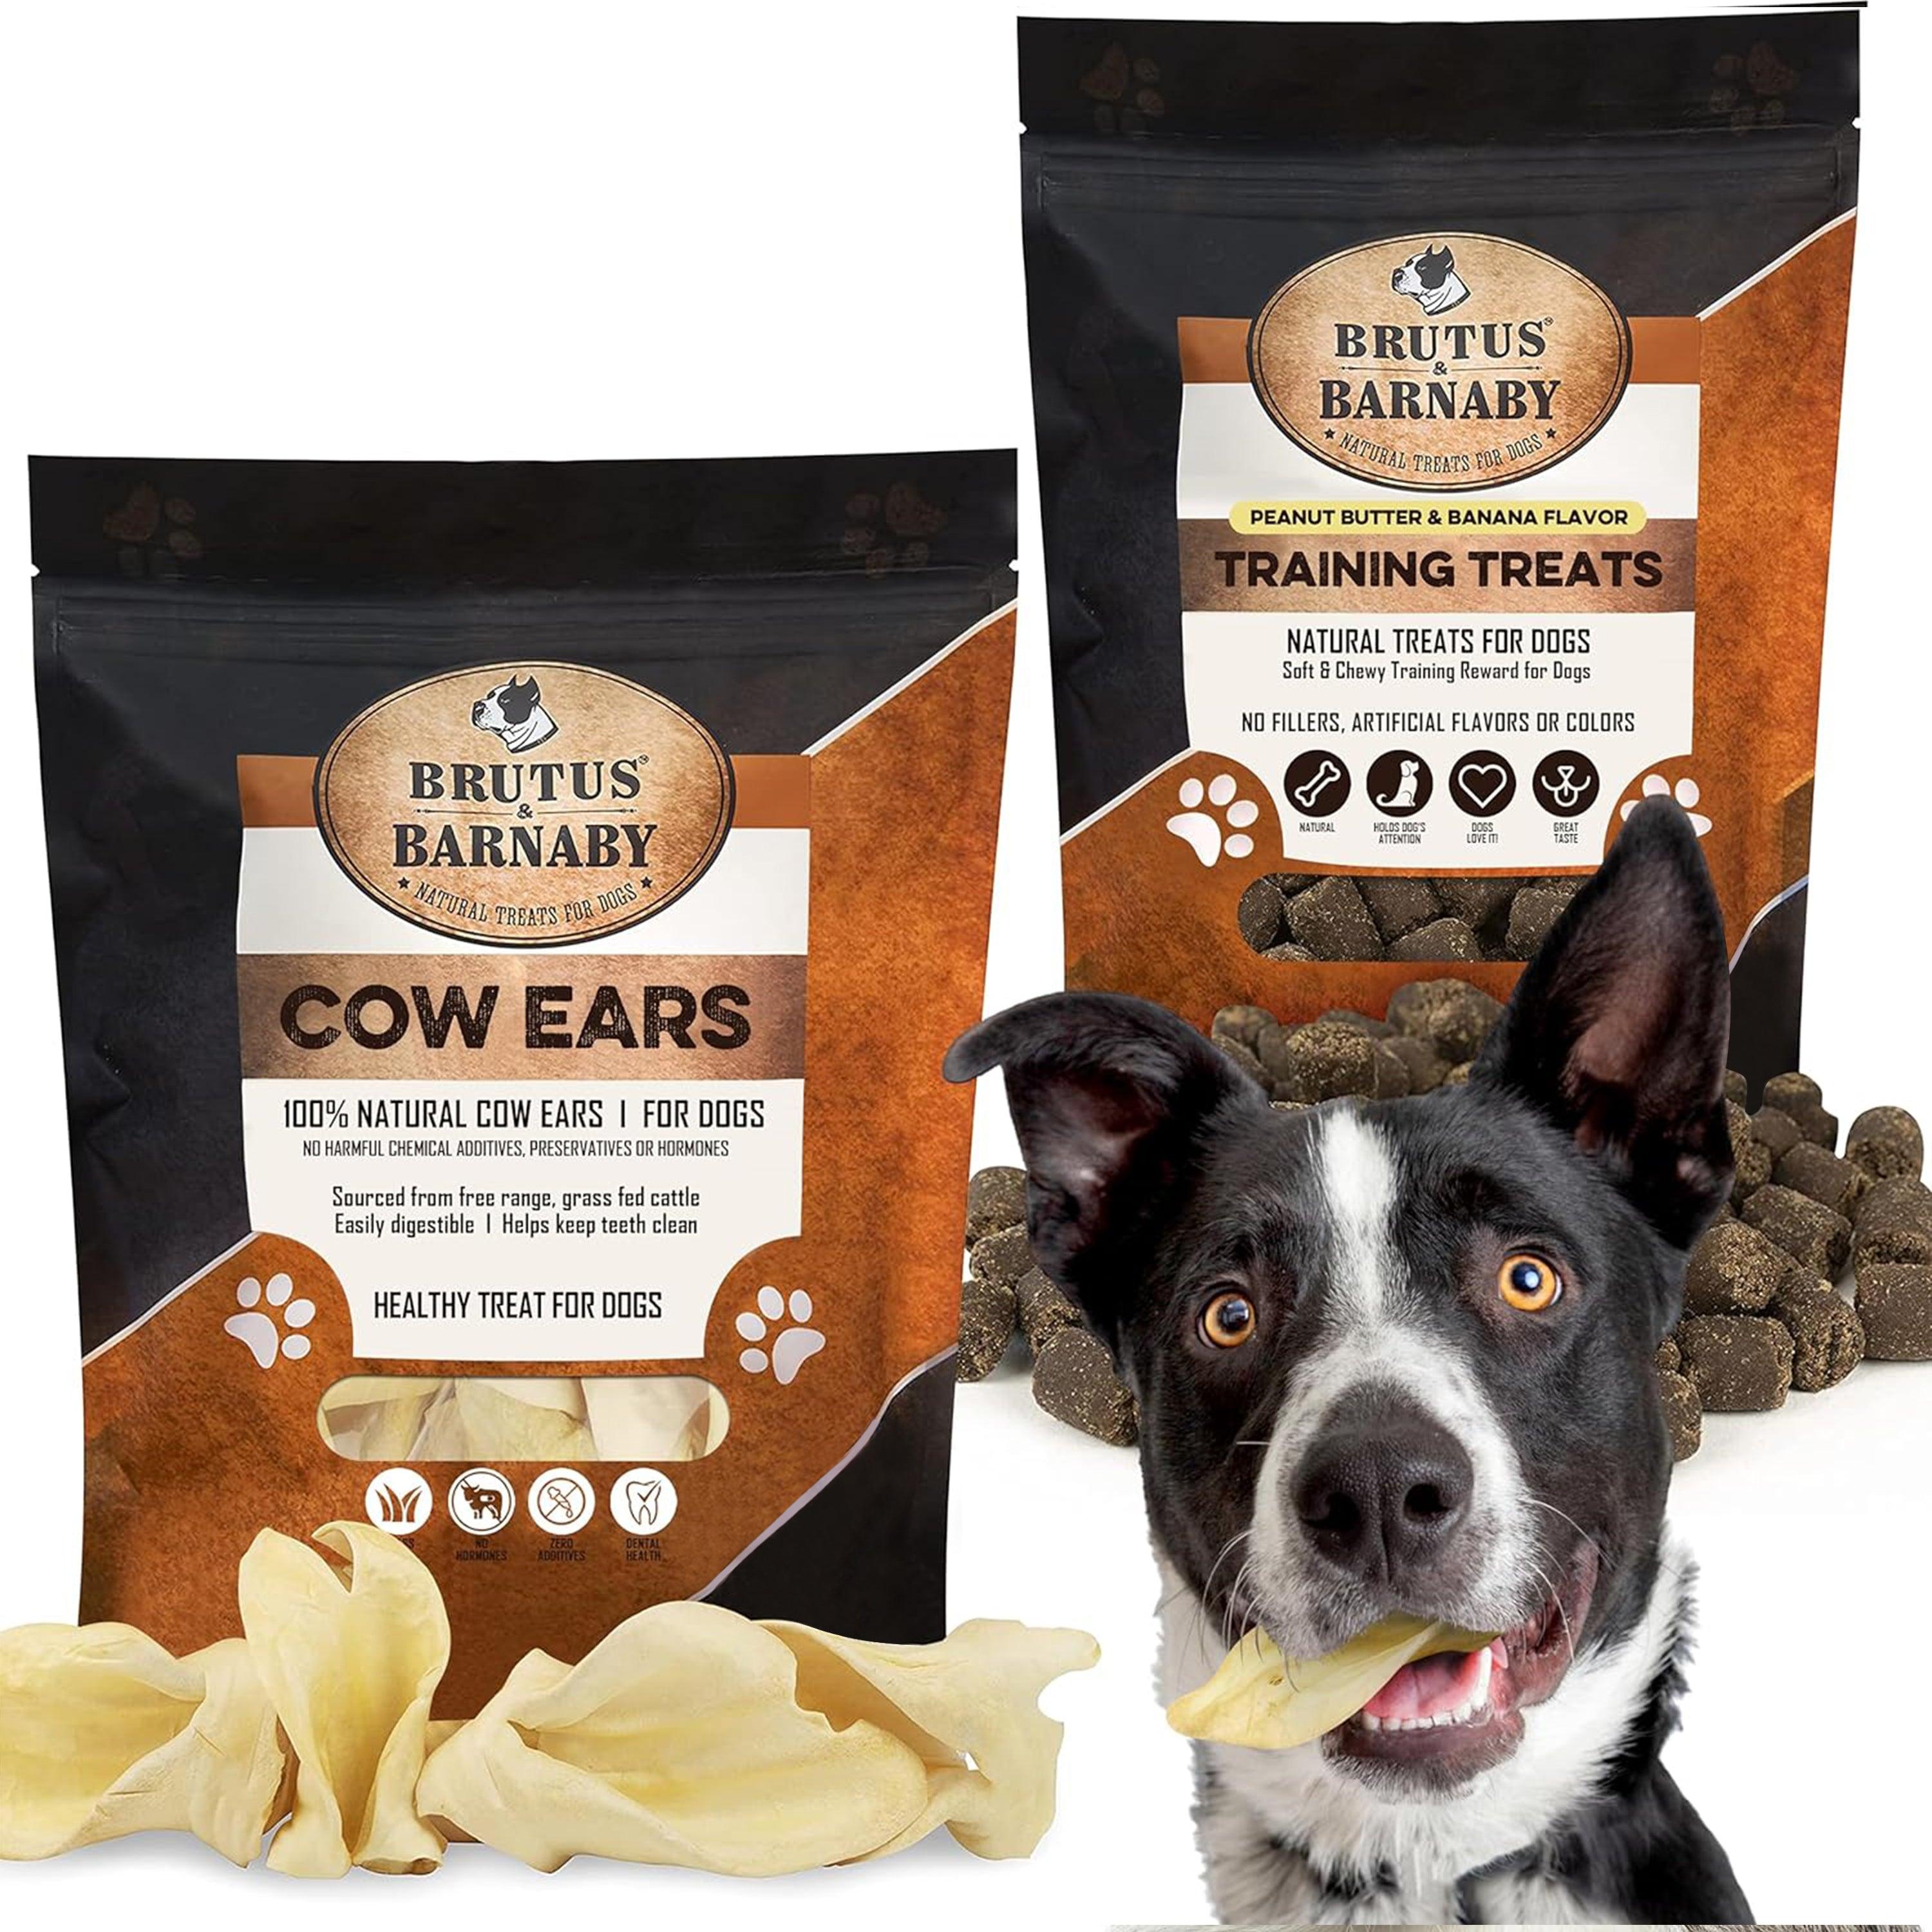 Cow Ears (12) + Training Treats for Dogs (8oz) - Brutus & Barnaby